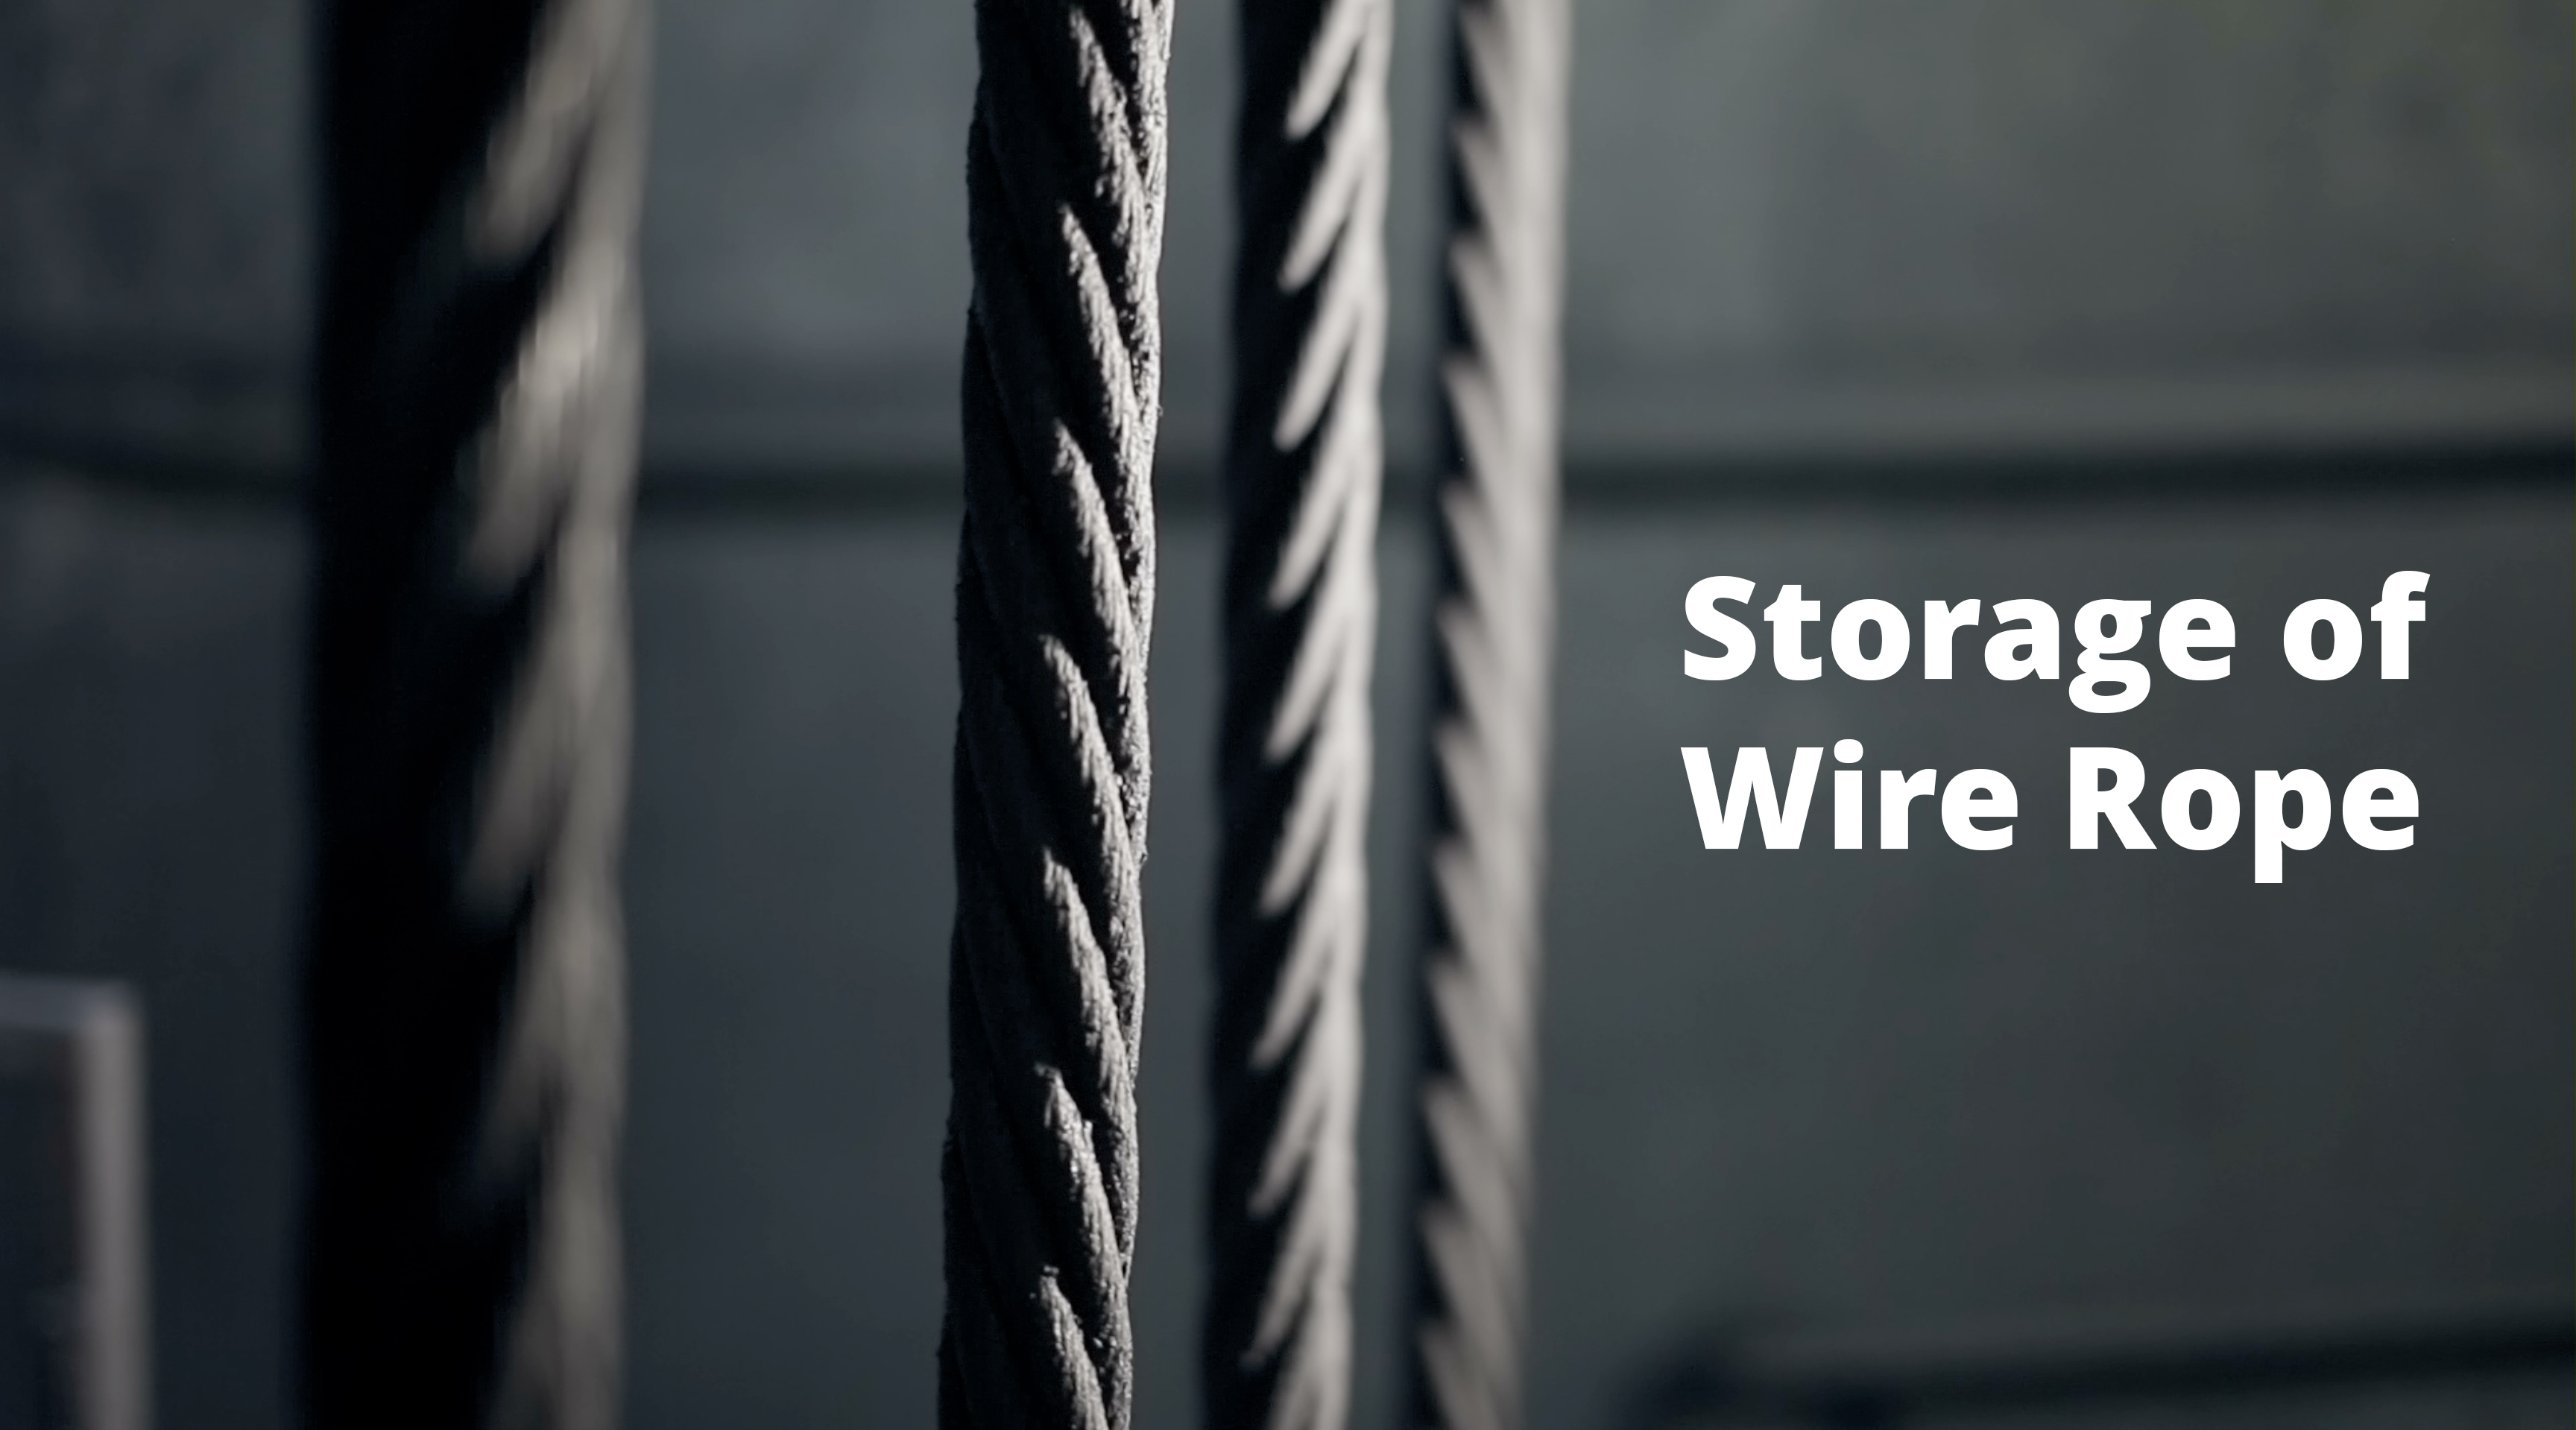 Thumbnail image for the podcast "Storage of wire rope" featuring an image of steel wire rope & text containing the podcast title.